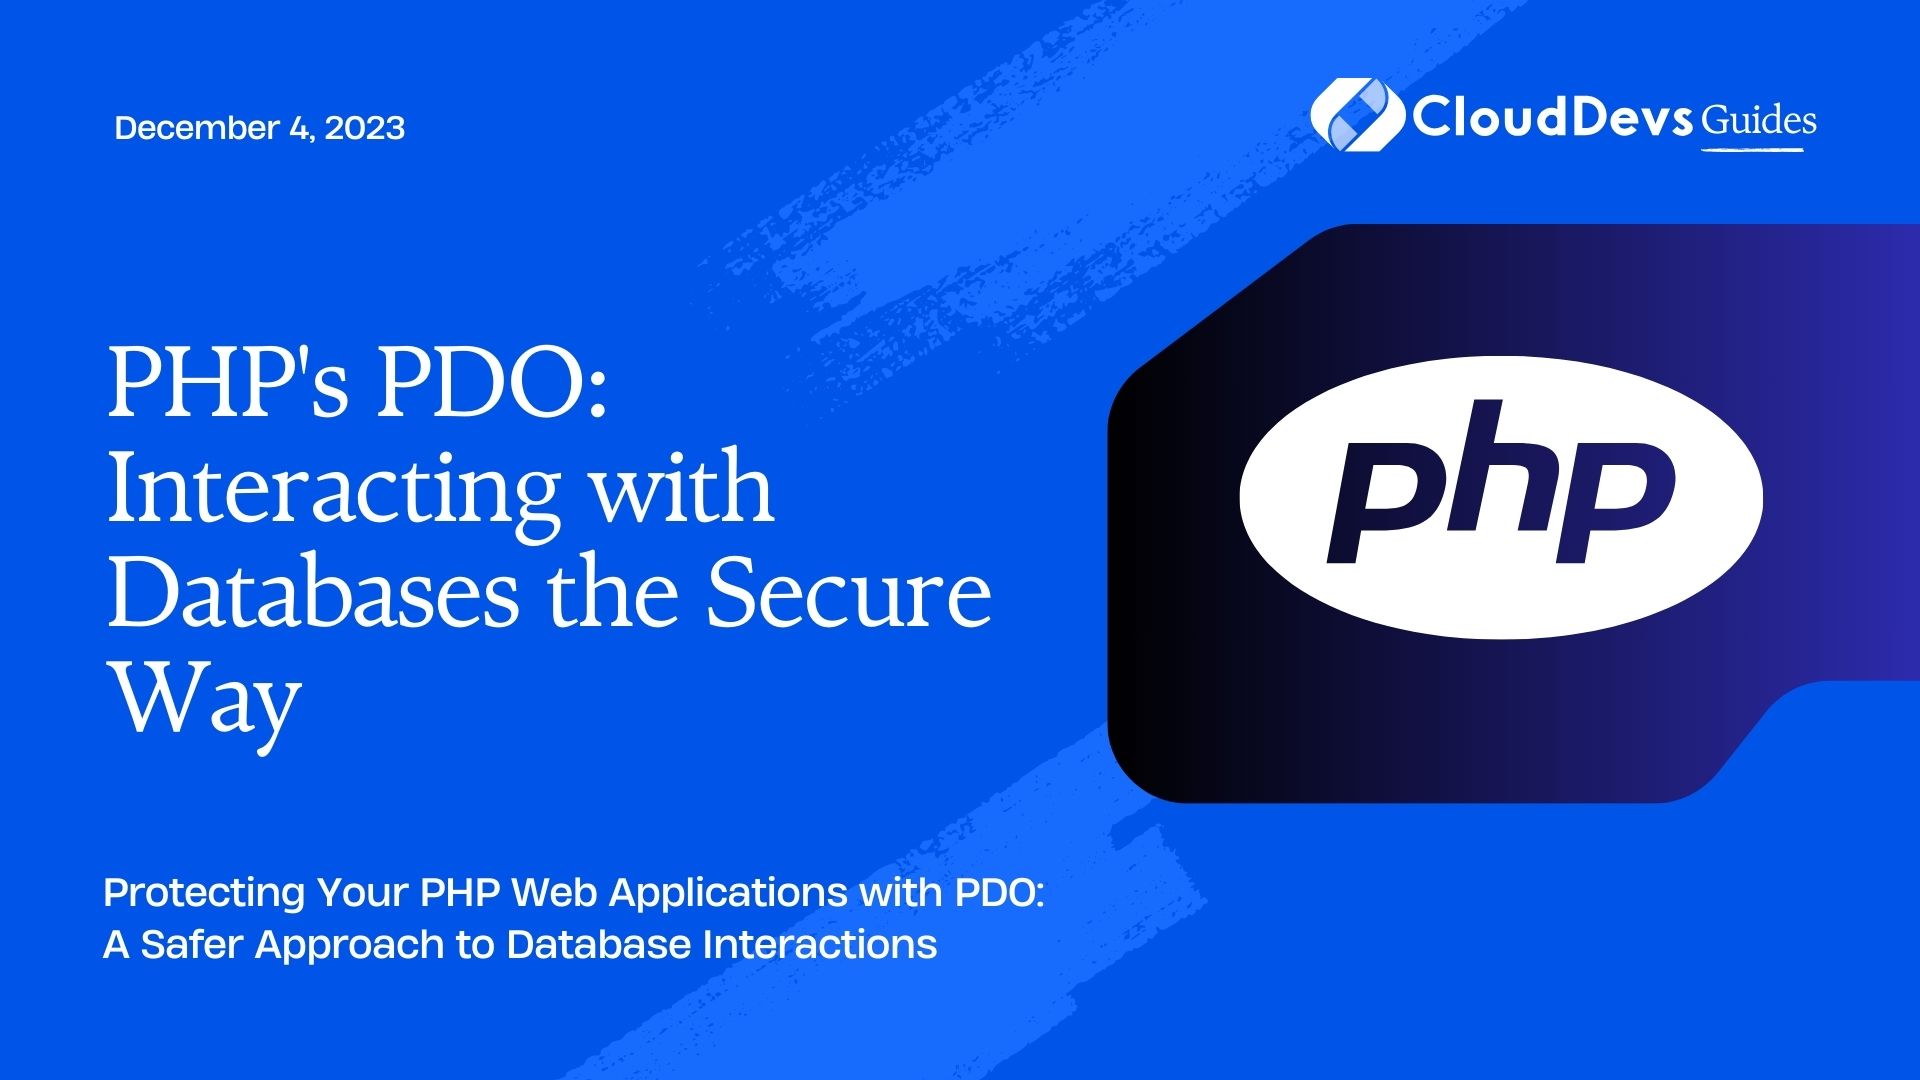 PHP's PDO: Interacting with Databases the Secure Way